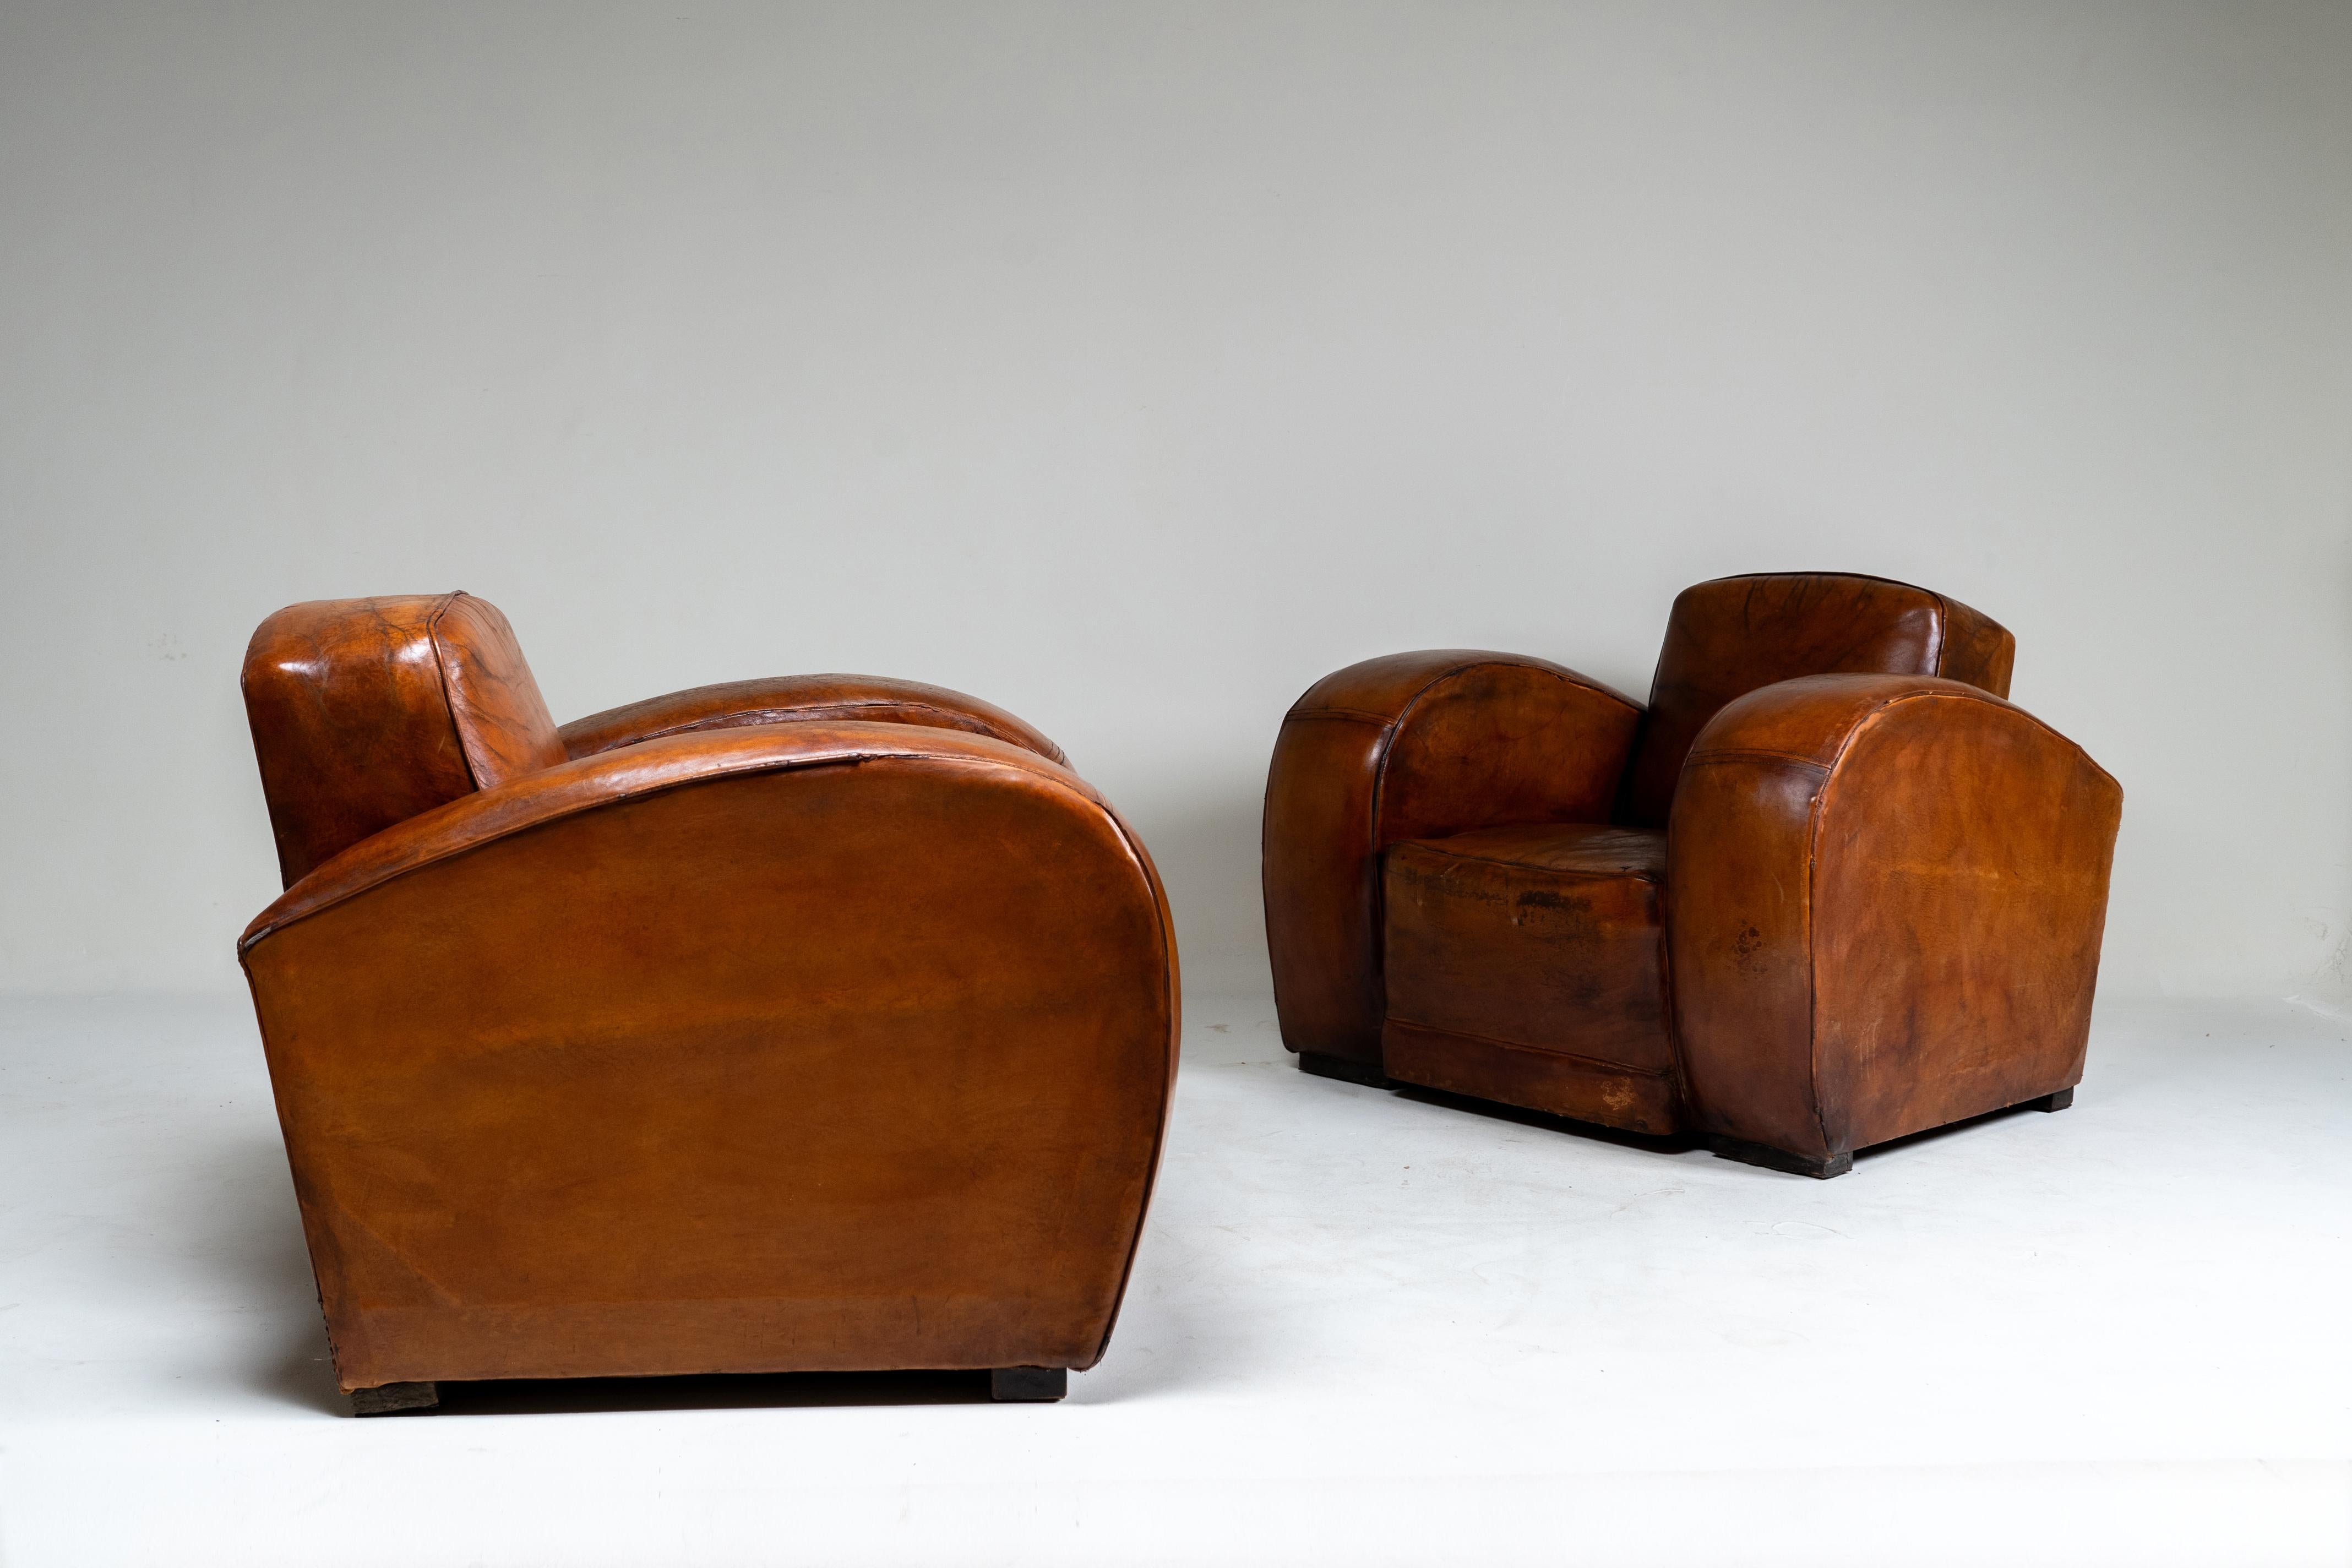 A Pair of Art Deco Leather Club Chairs, France c.1930 For Sale 4